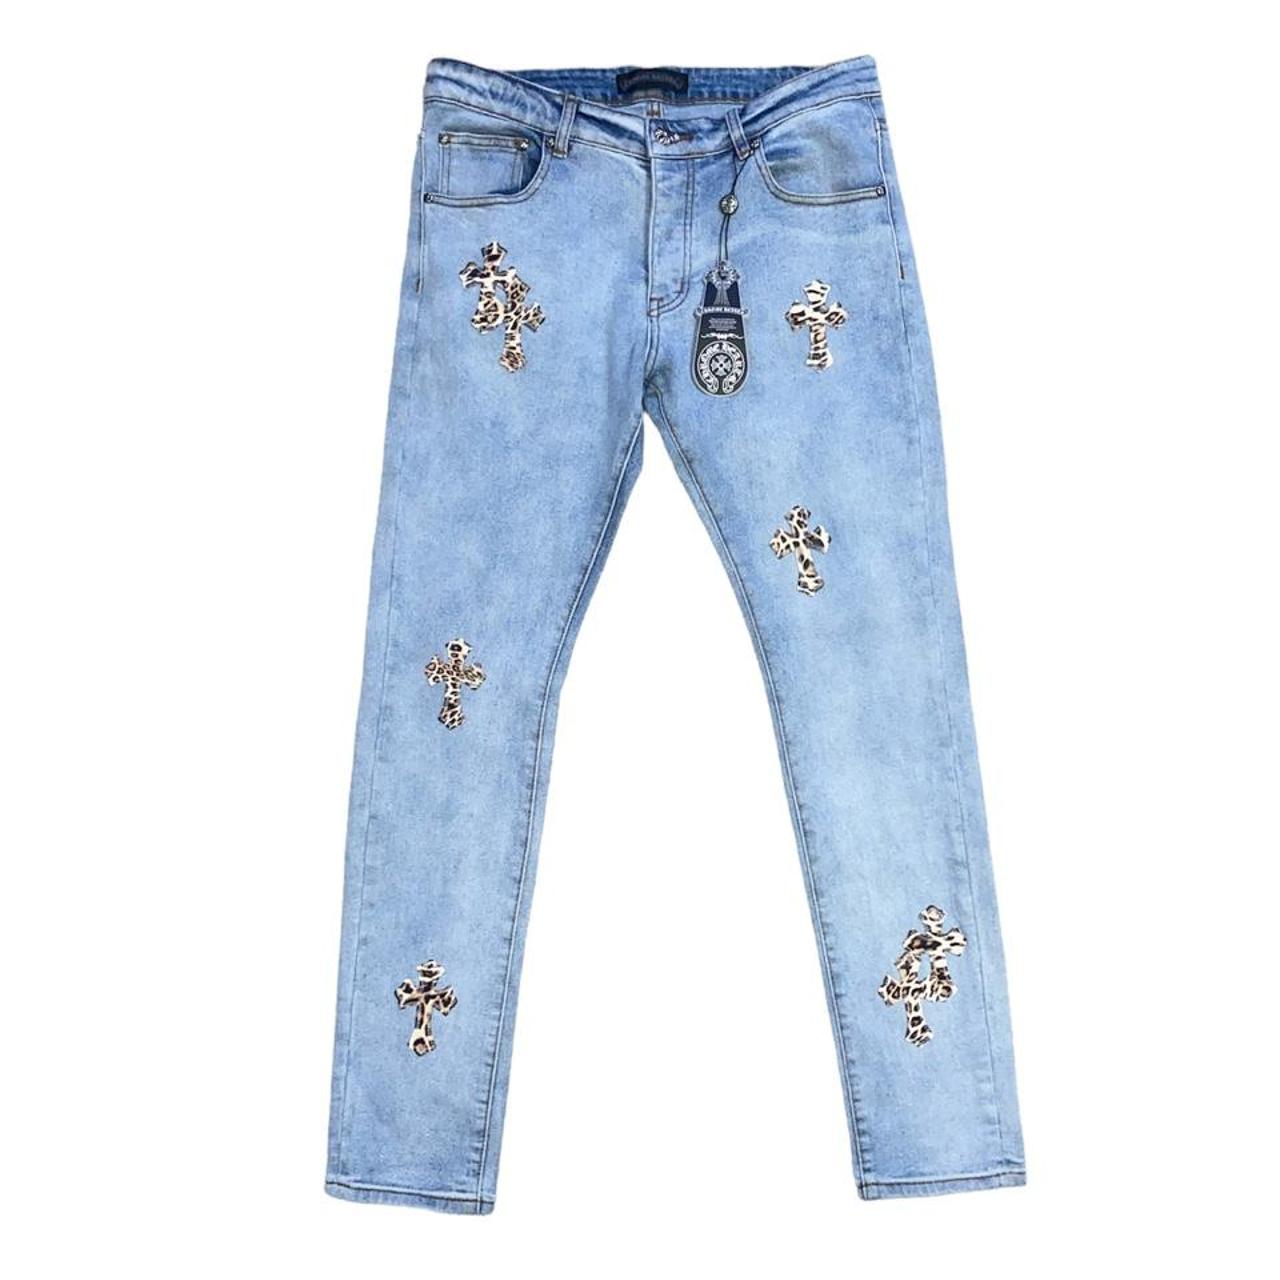 Chrome Hearts Cross Patch Blue Jeans With Cheetah... - Depop